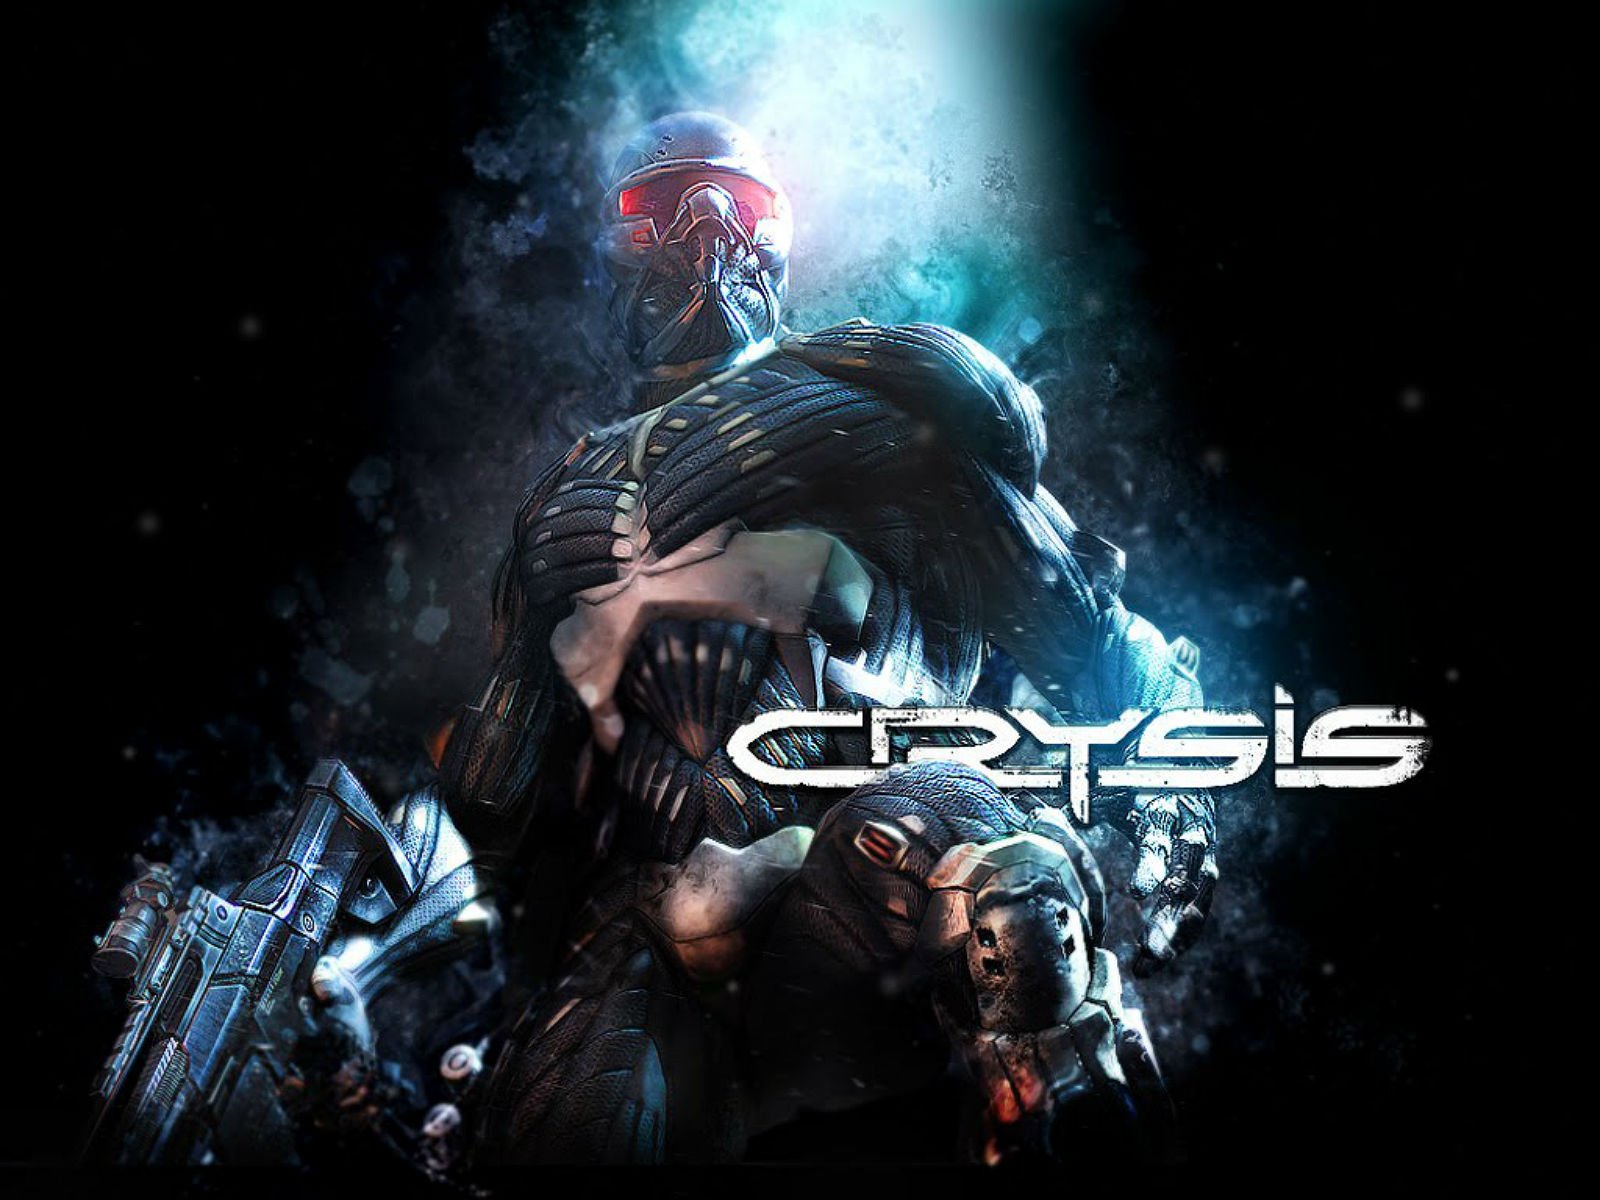 crysis, Sci fi, Fps, Shooter, Action, Fighing, Futuristic, Warrior, Military, Apocalyptic, Poster Wallpaper